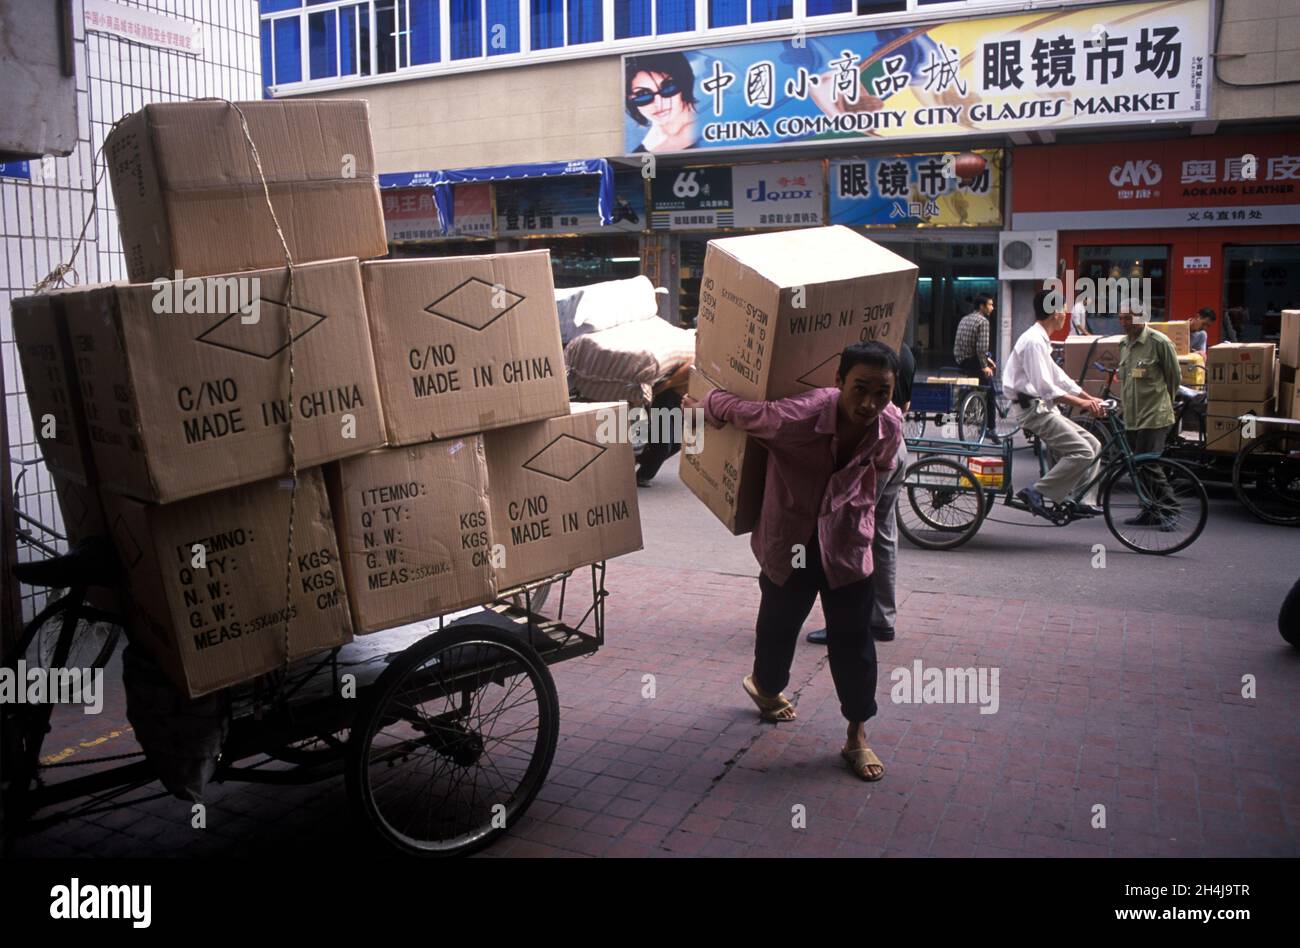 Yiwu, Zhejiang Province,  Republic of China, 2001, 2000s,  Consumer goods destined for the English-speaking world. Made in China is printed on large brown boxes carried off by a market trader in the small commodities Yiwu market which is the largest market in the world with an annual turn over of over $1billion. HOMER SYKES Stock Photo